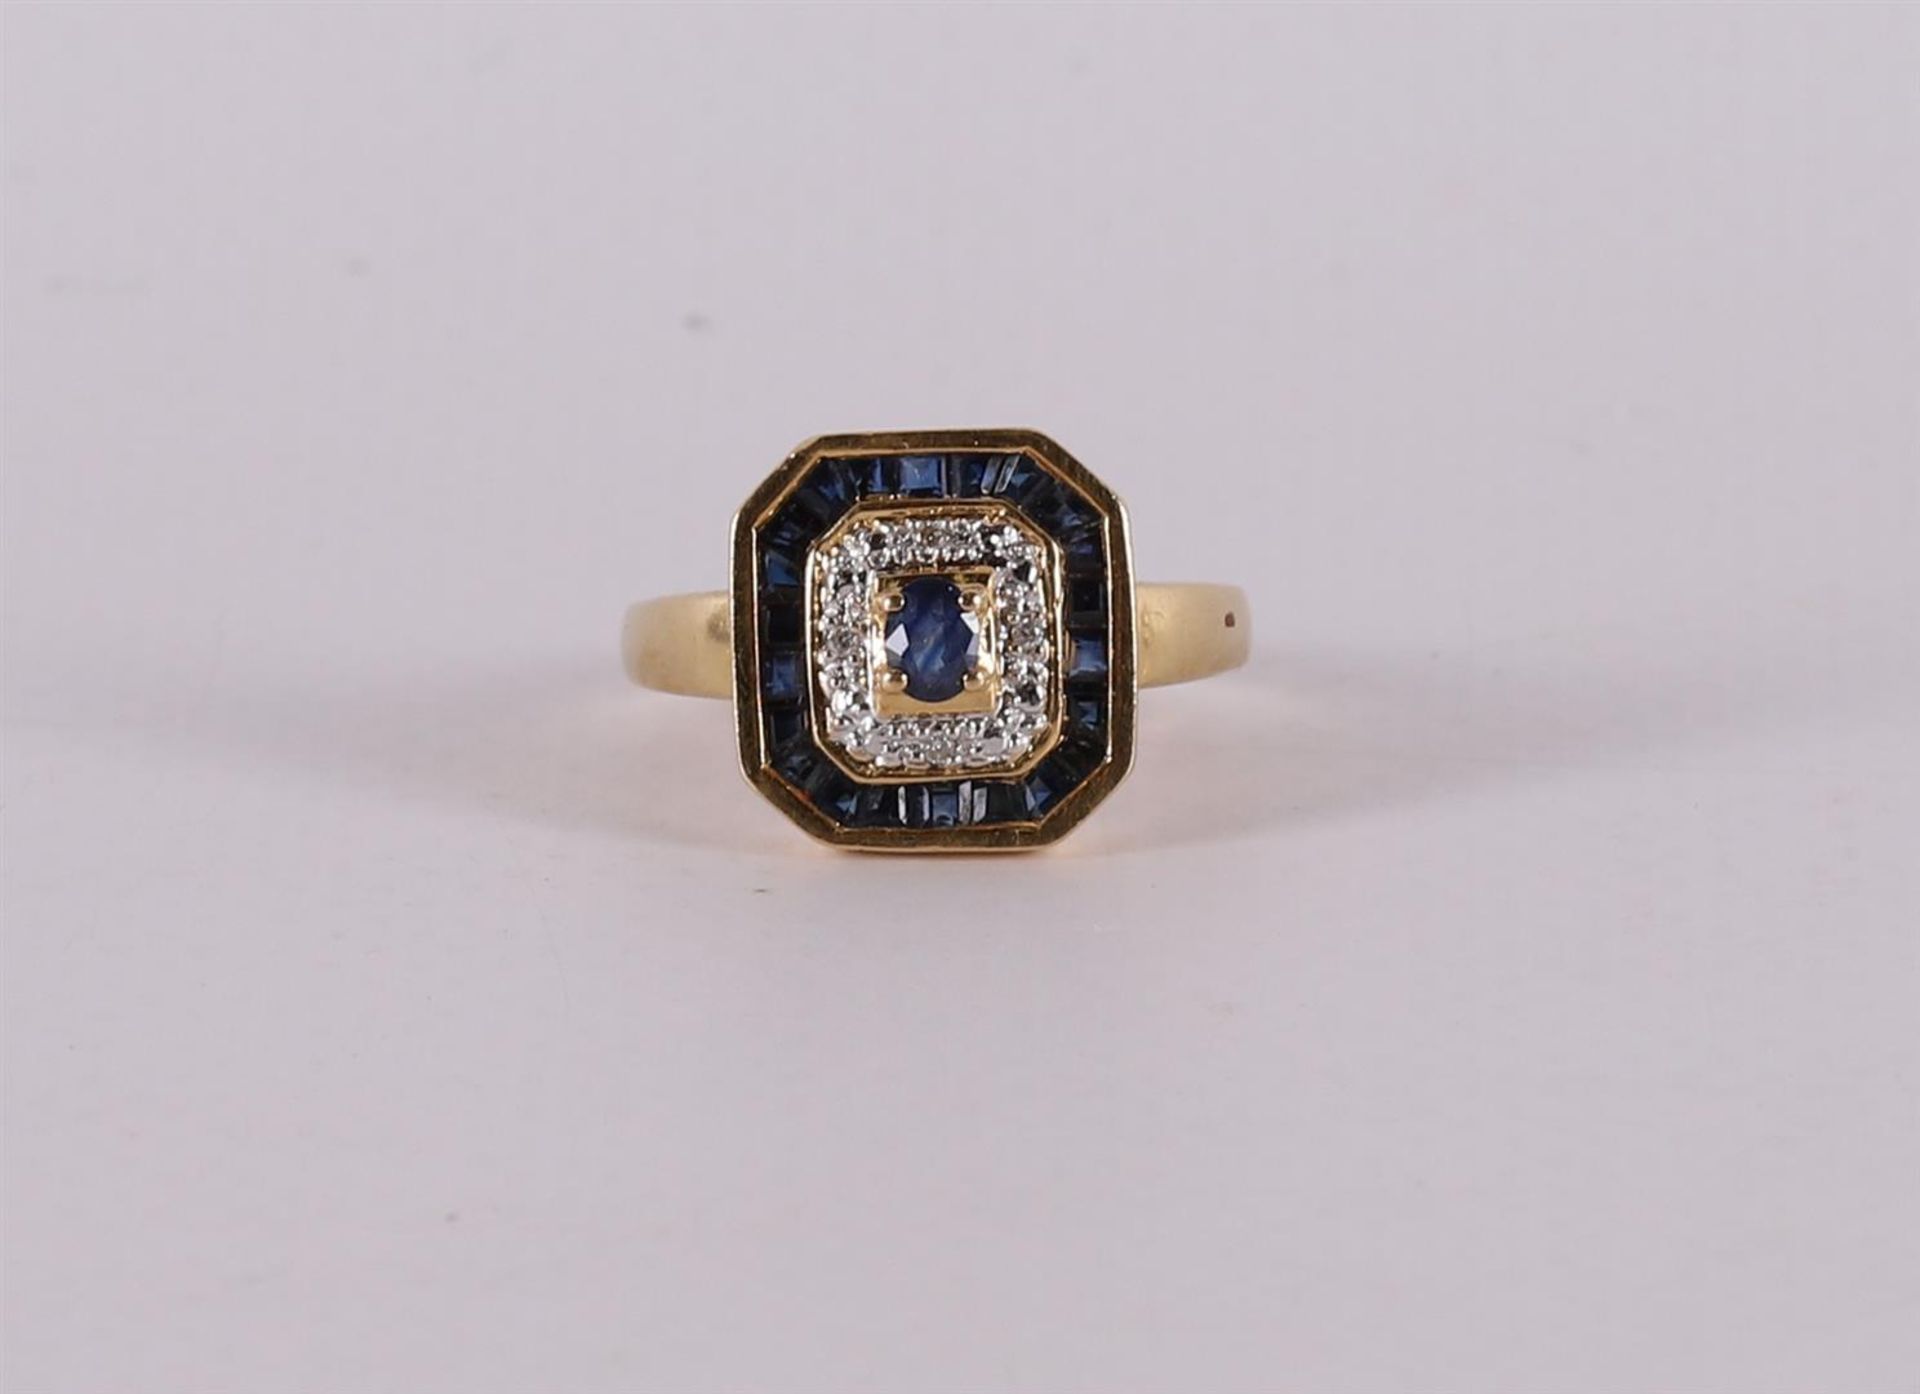 An 18 kt gold ring with facet cut blue sapphires and brilliants.